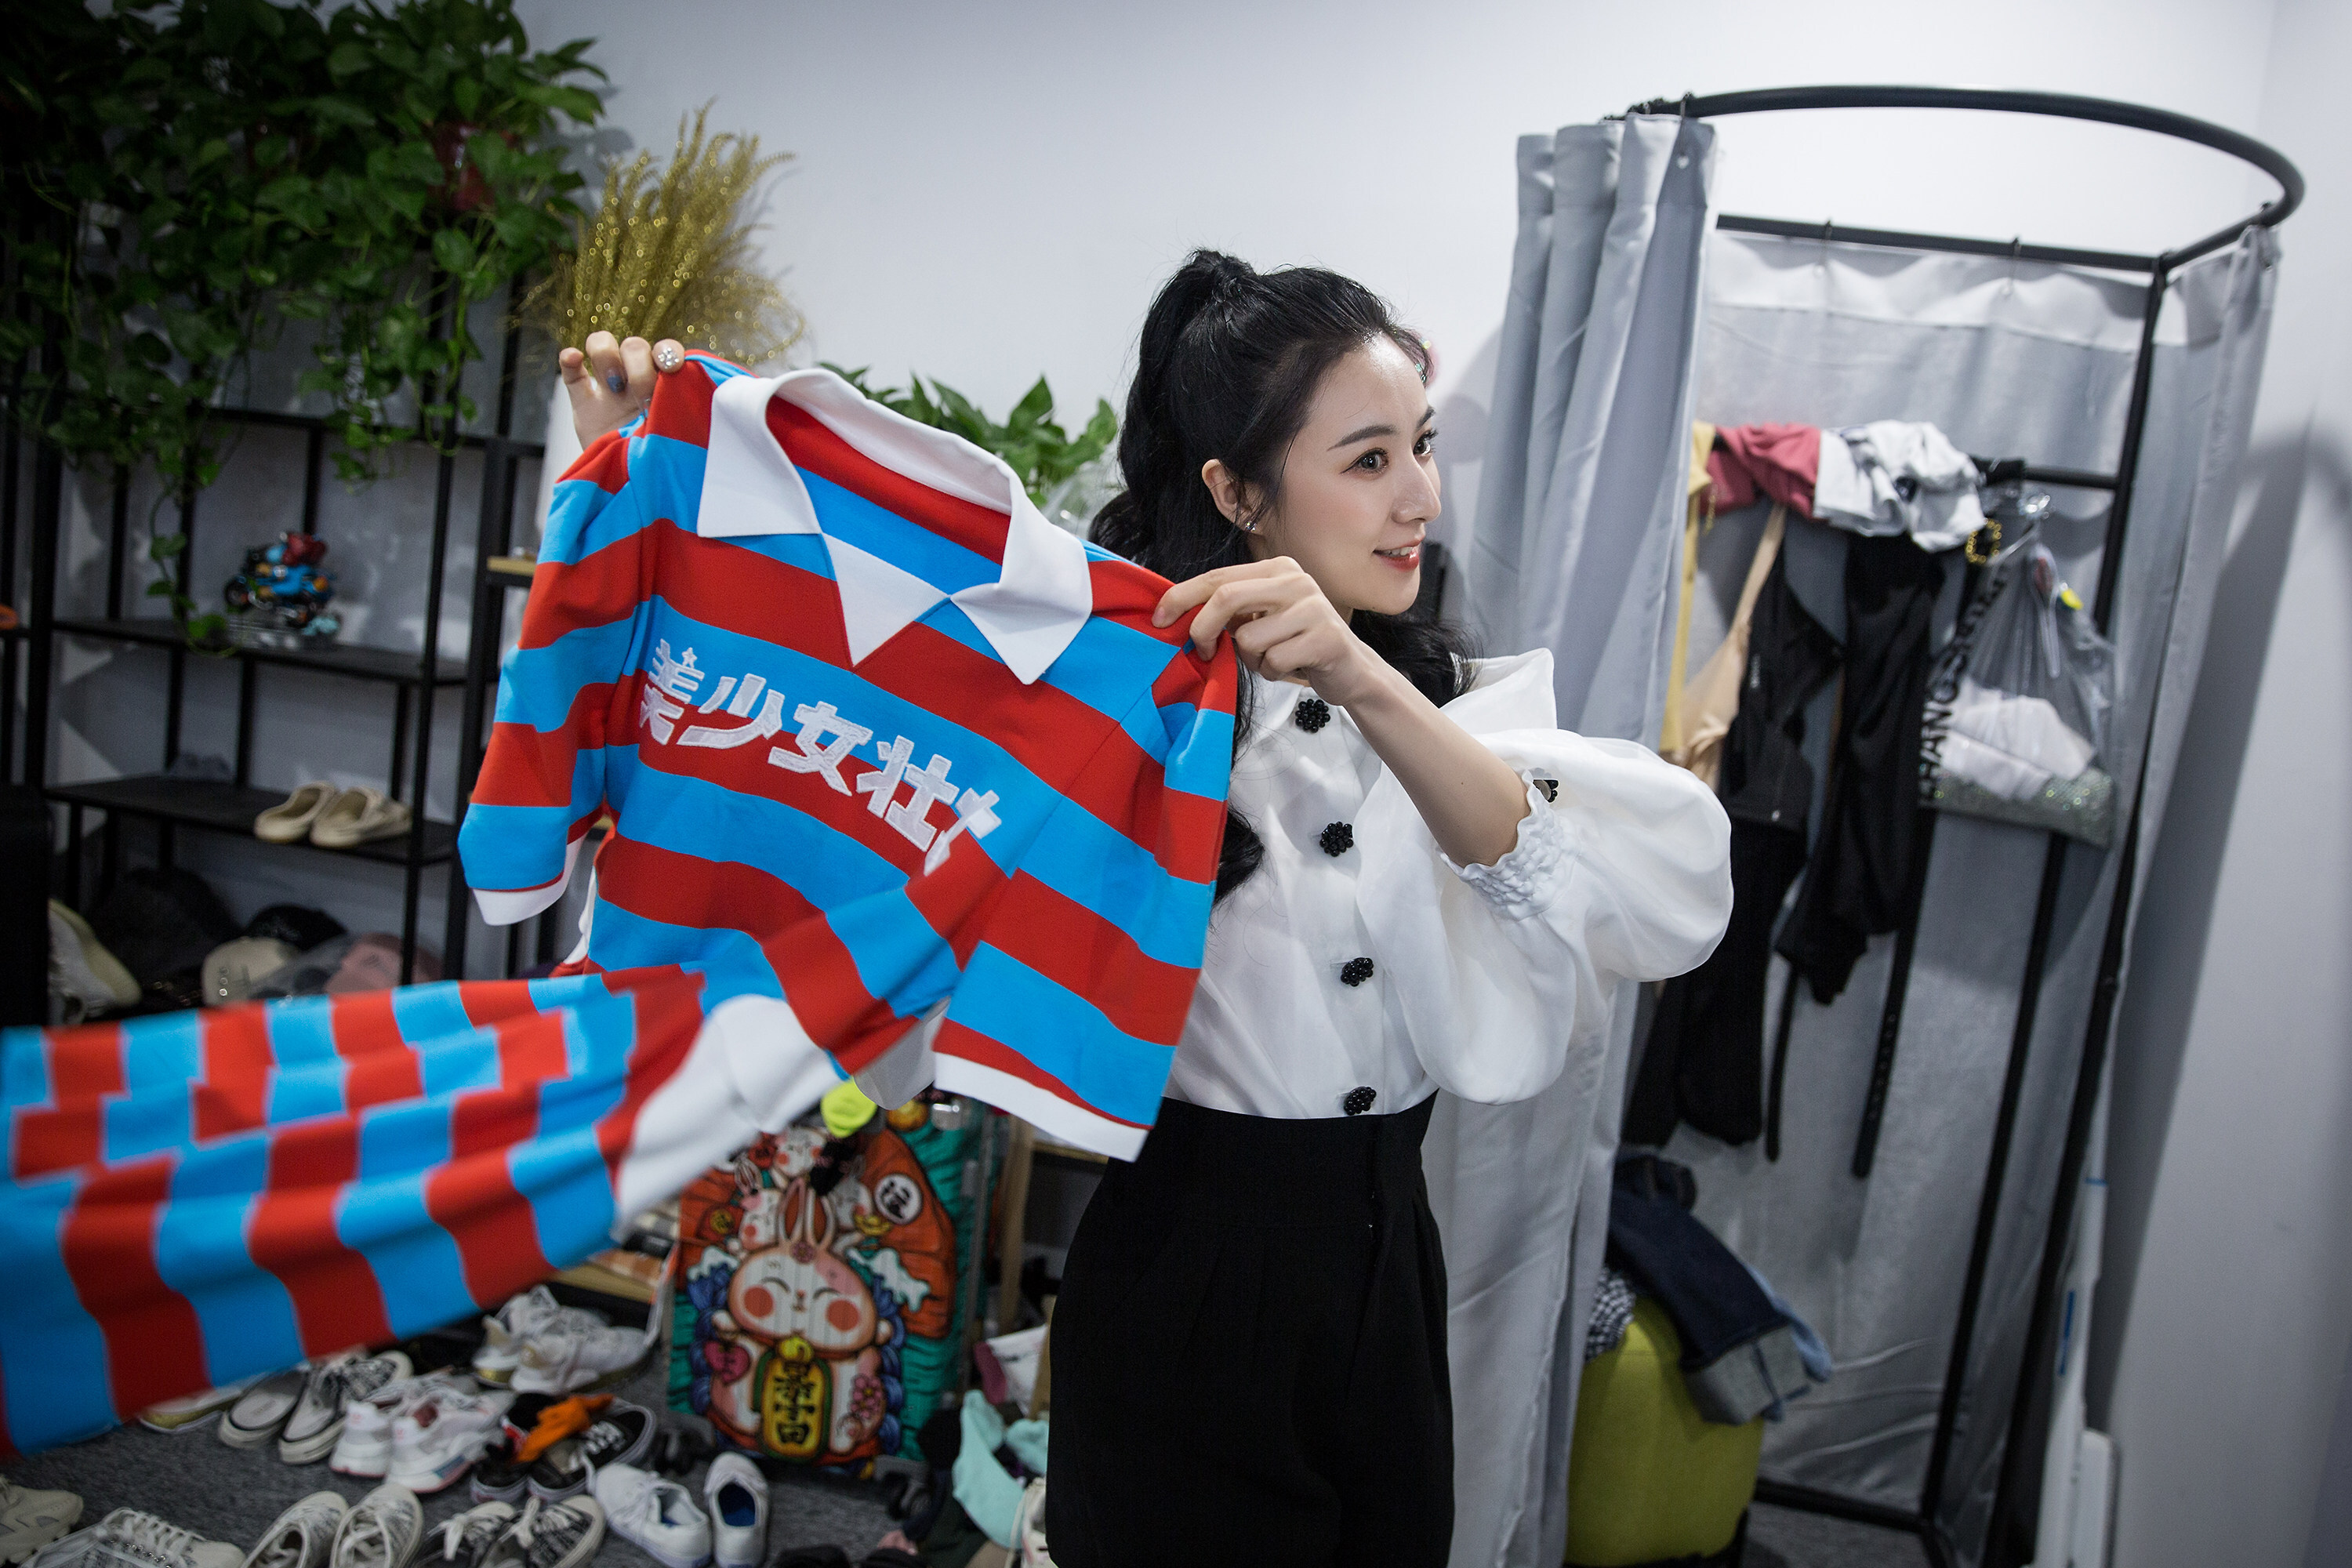 China’s booming live commerce industry has been highly lucrative for Huang Wei, known as Viya, and other top sales hosts. Photo: Getty Images